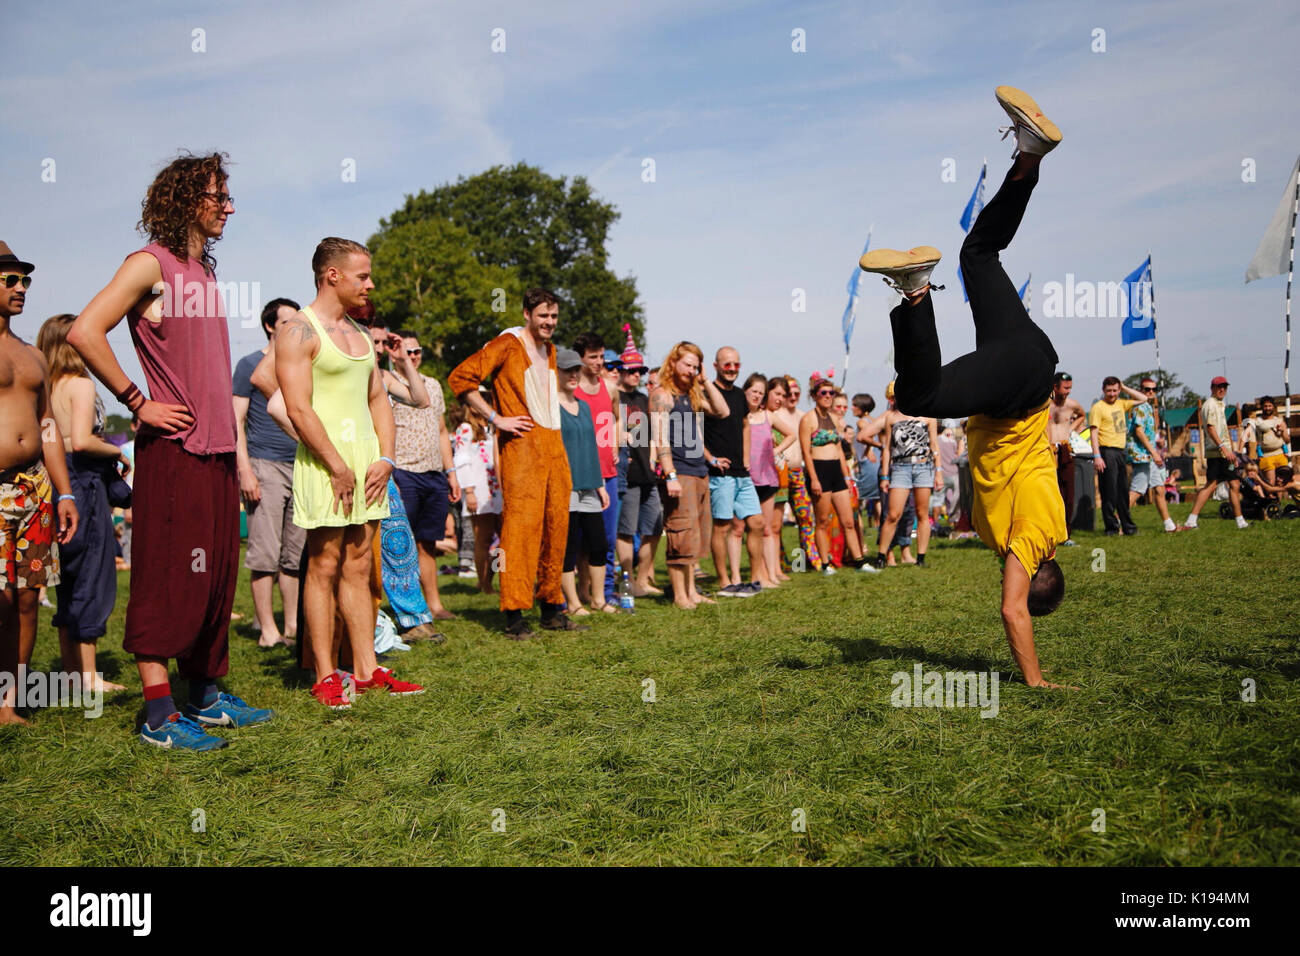 Northampton, UK. 25th Aug, 2017. Shambala festival, Northampton officially kicks off today with an early morning limbo and capoeira workshop under sunny skies. Festival goers shake off last nights hangovers and attempt cartwheels, dancing and singing in the Kelmarsh Estate. Credit: Wayne Farrell/Alamy Live News Stock Photo